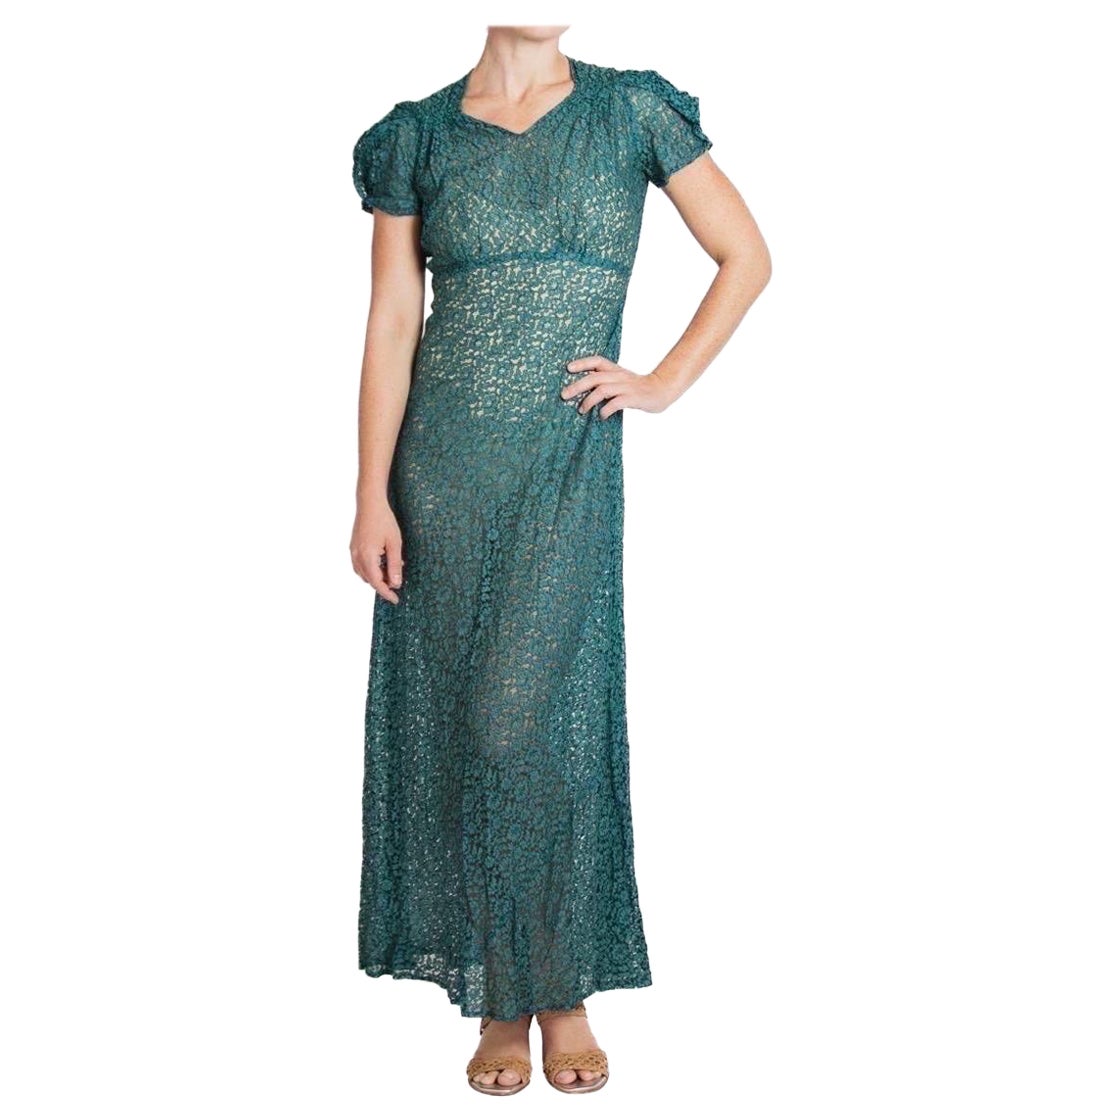 1960S Dark Teal Cotton / Rayon Lace Dress For Sale